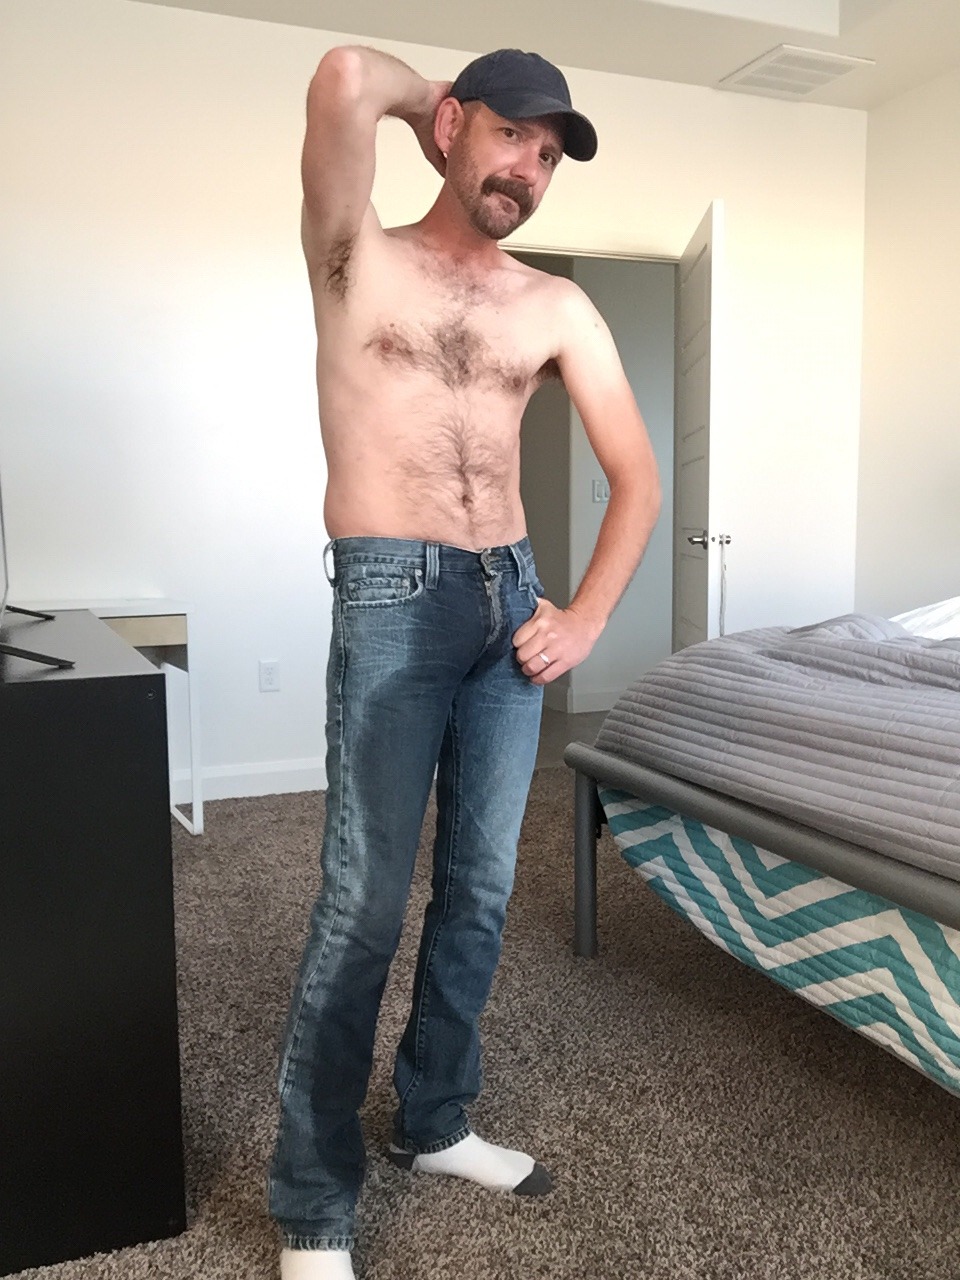 stacheman76:  Pissed in my jeans   SO fucking hot!!!! I love seeing your sexy body